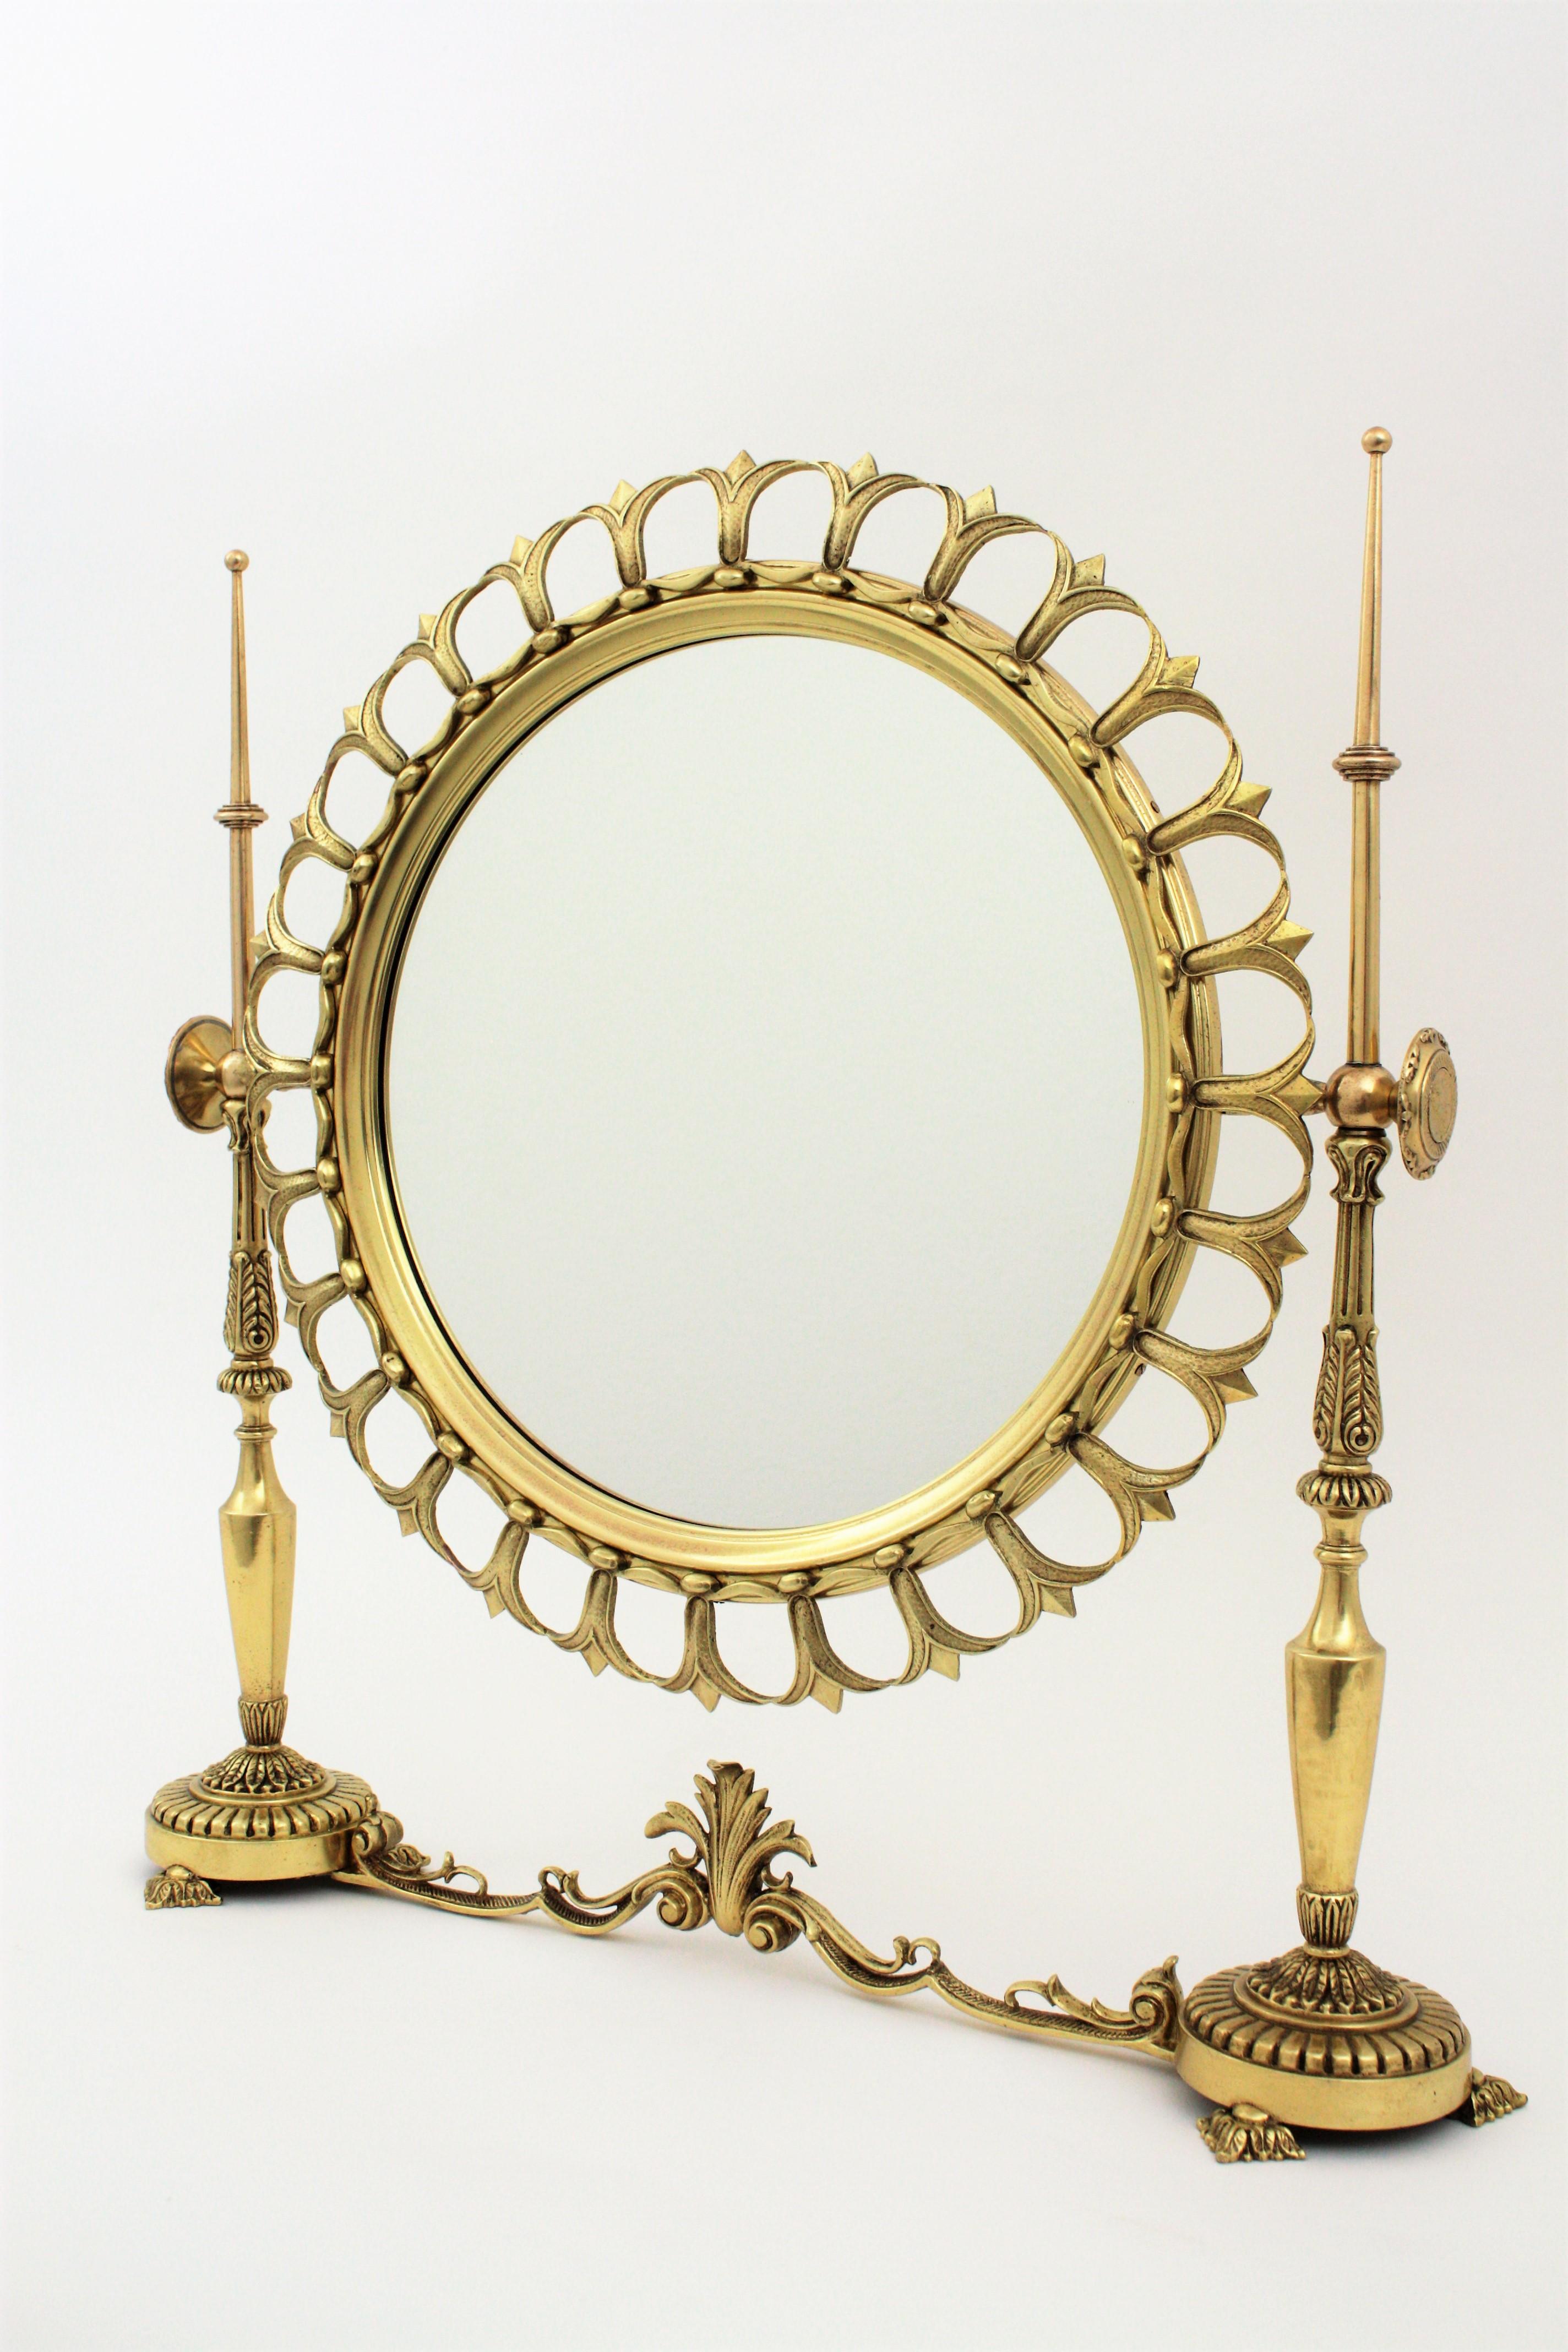 Neoclassical Sunburst Vanity or Table Mirror in Brass For Sale 1